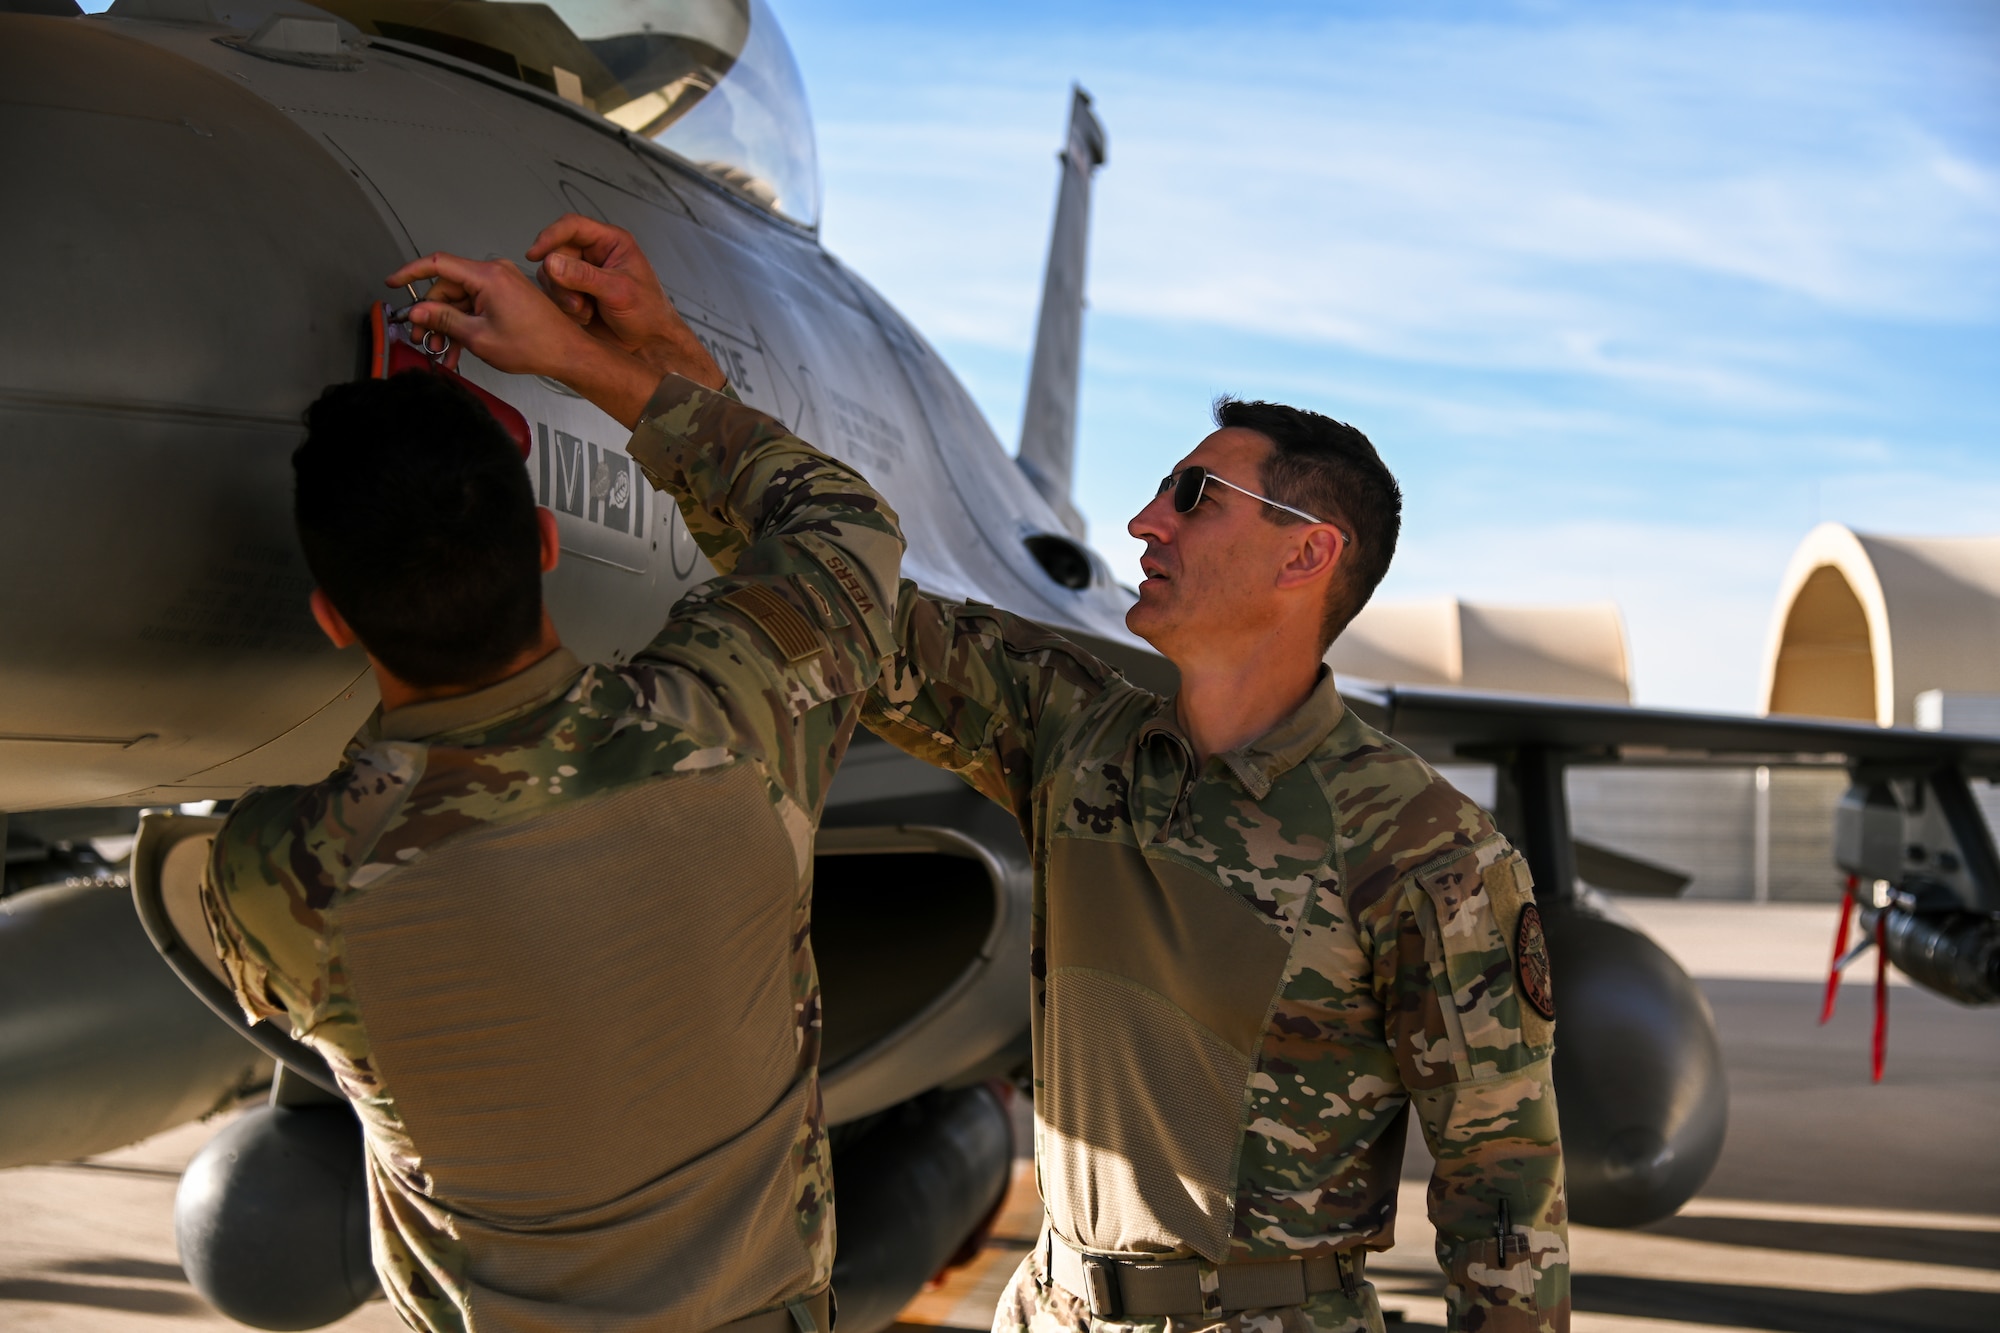 Senior Master Sgt. Steve Veers, 176th Expeditionary Fighter Squadron aerospace propulsion superintendent, and Airman 1st Class Isac Veers 176th EFS aviation resource management journeyman, inspect an F-16 Fighting Falcon at Prince Sultan Air Base, Kingdom of Saudi Arabia, Dec. 13, 2021. This deployment is the last of Steve’s 31 year career and the first for Isac. (U.S. Air Force photo by Staff Sgt. Christina Graves)